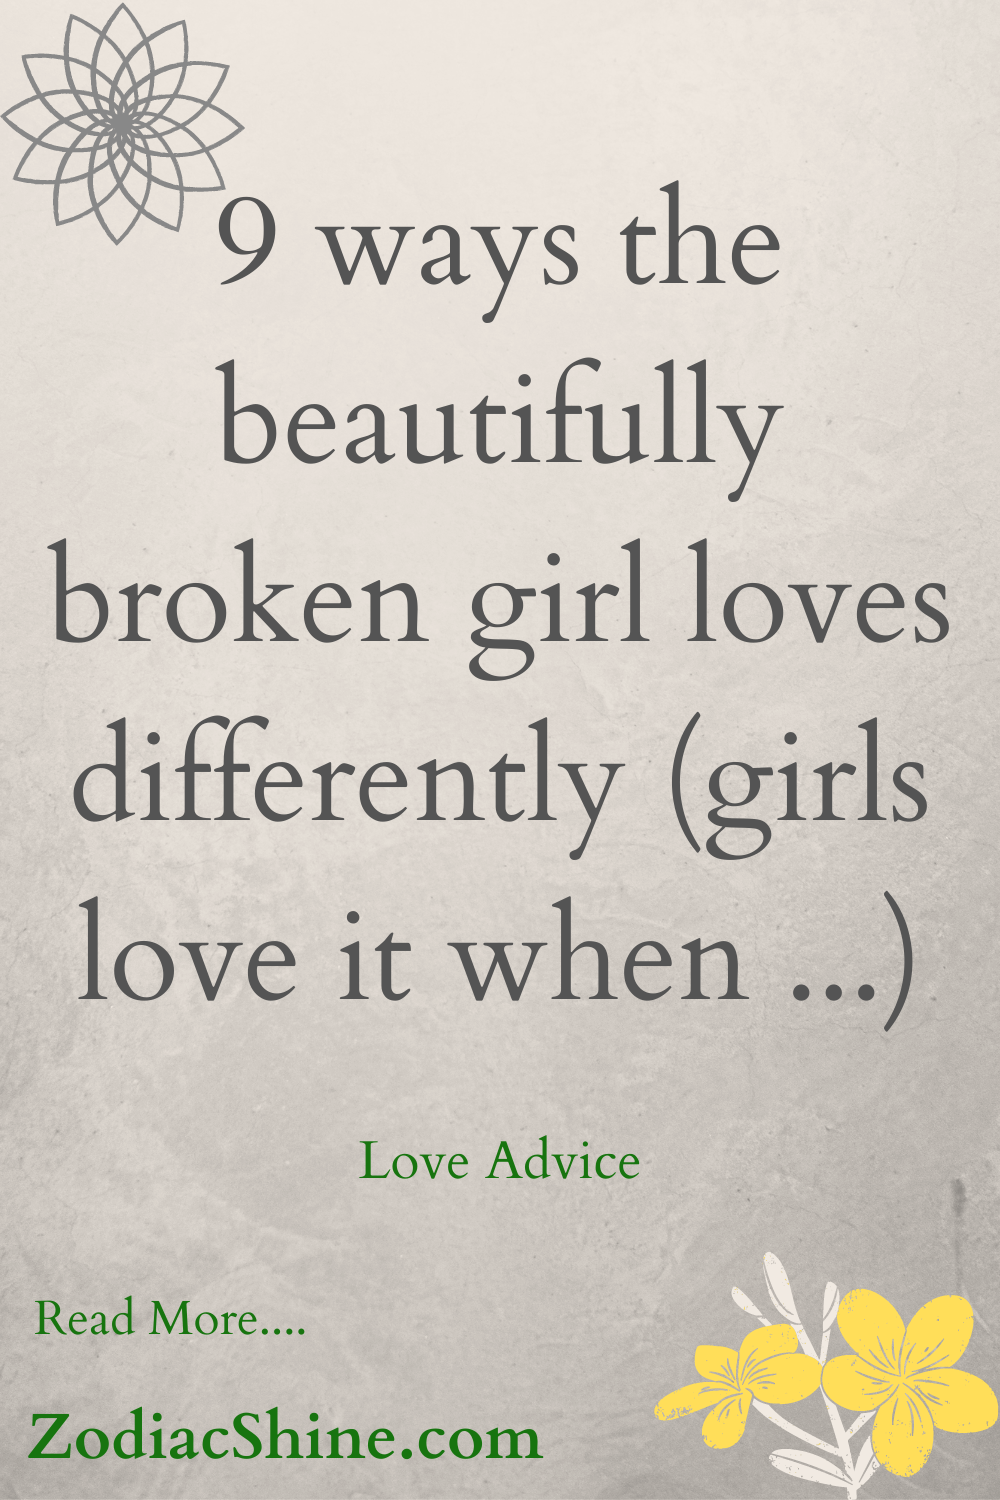 9 ways the beautifully broken girl loves differently (girls love it when ...)